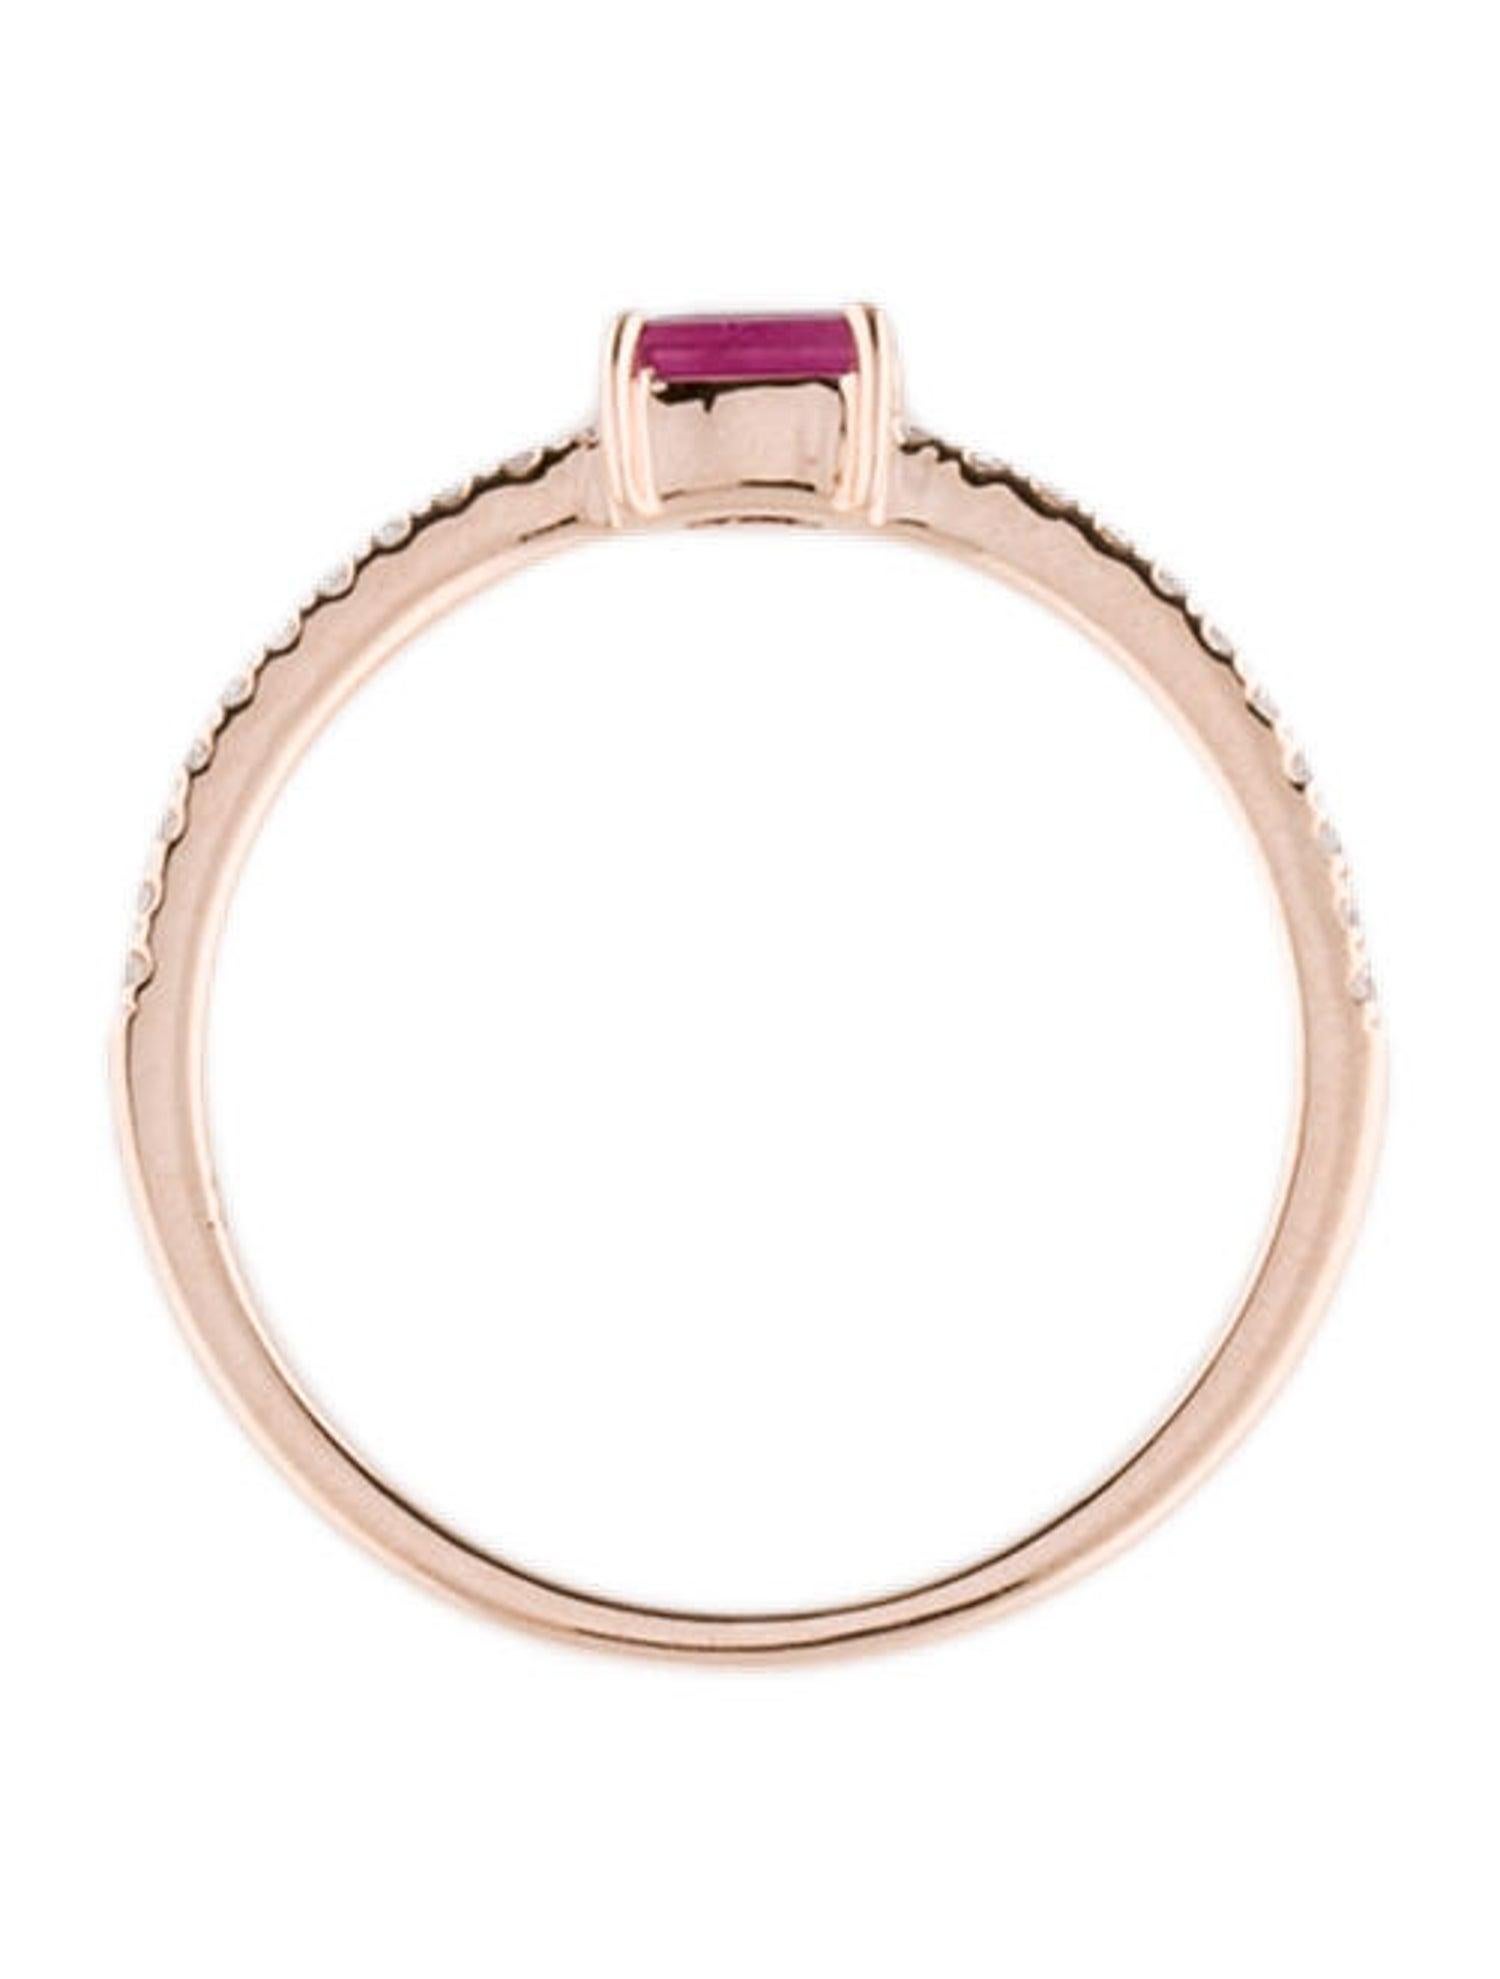 Charming and Elusive Design - This stackable ring features a 14k gold band, a baguette shaped gorgeous Ruby approximately 0.14cts, and round diamonds approximately 0.09 cts, 
Measurements for ring size: The finger Size of the ring is 6.5 and your